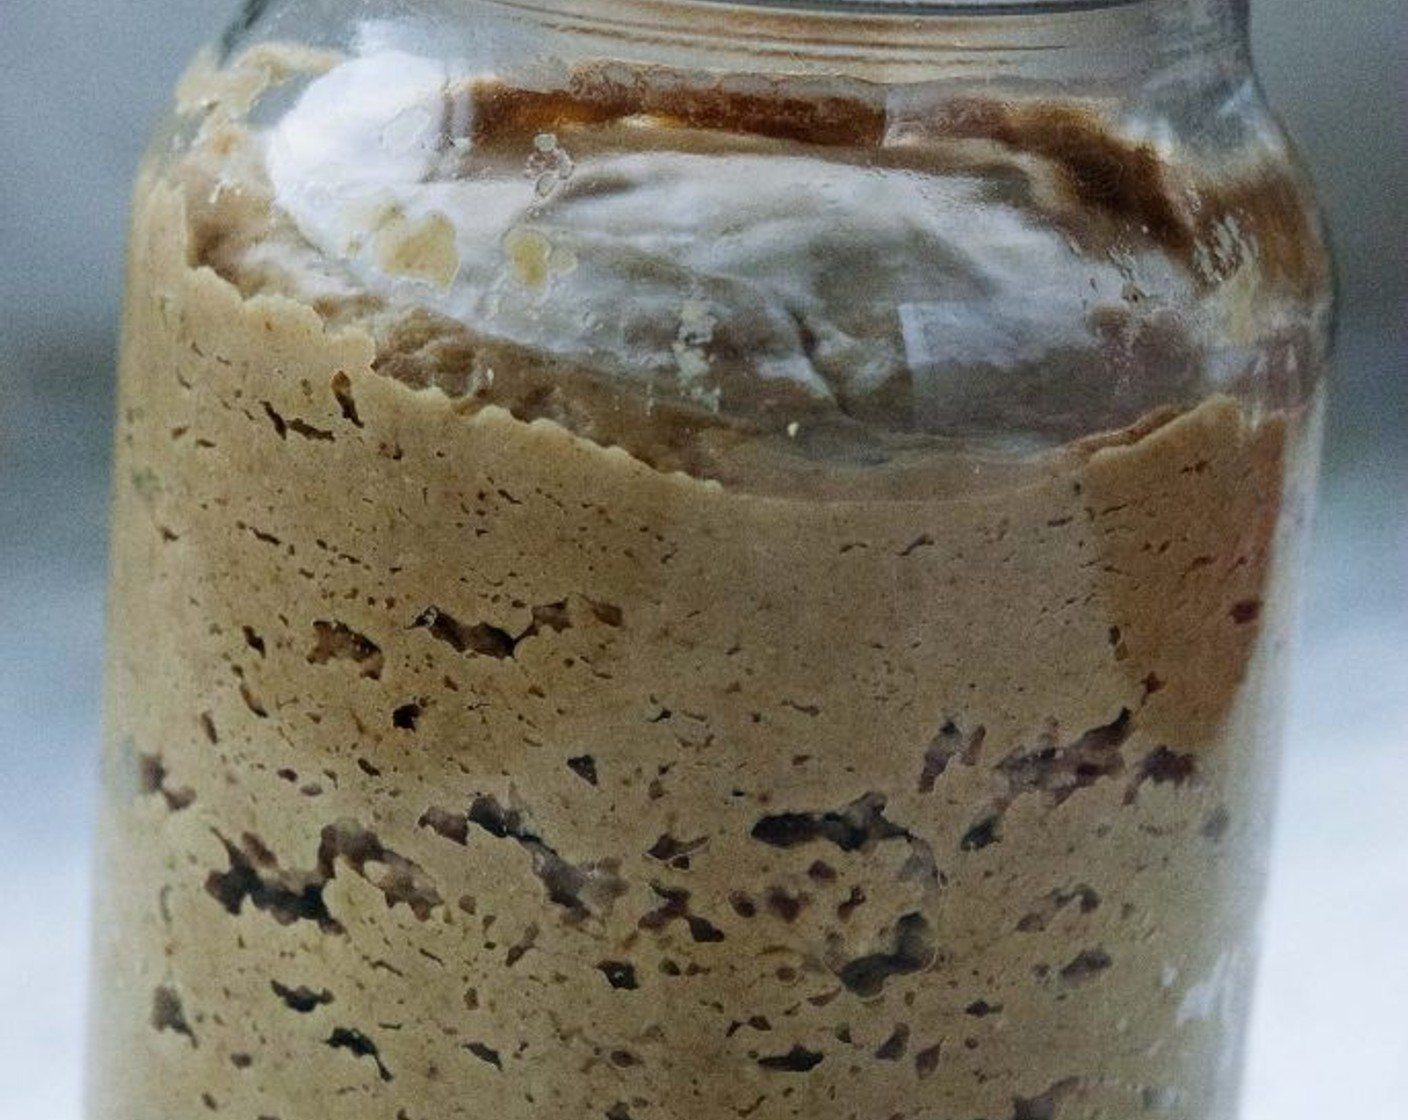 step 2 Pour hummus into a jar. Cover with cheesecloth and let it ferment in a dark place for about 3 days, or until bubbles form on top.